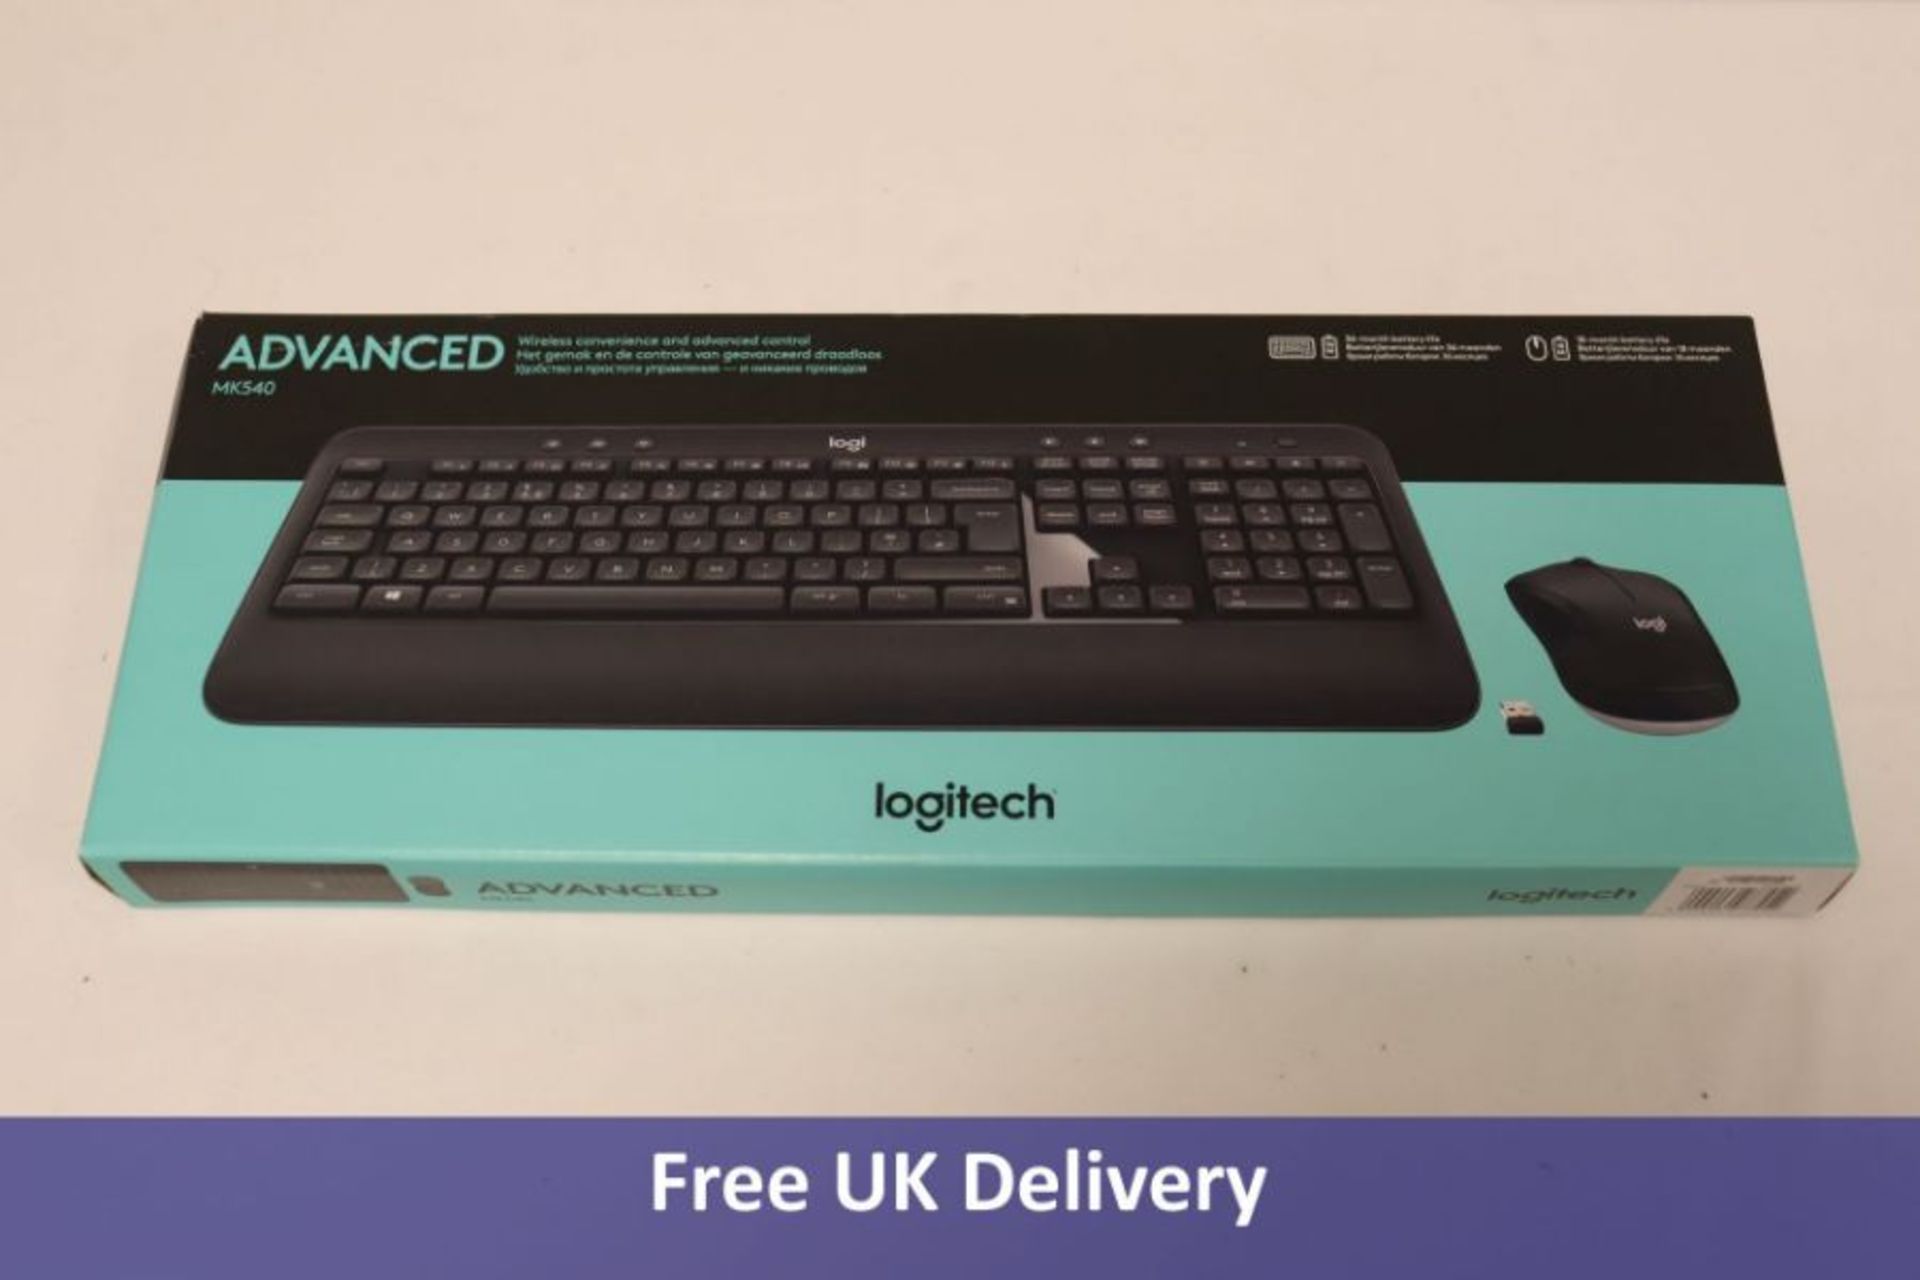 Two Logitech MK540 Advanced Wireless Keyboard and Mouse Combos